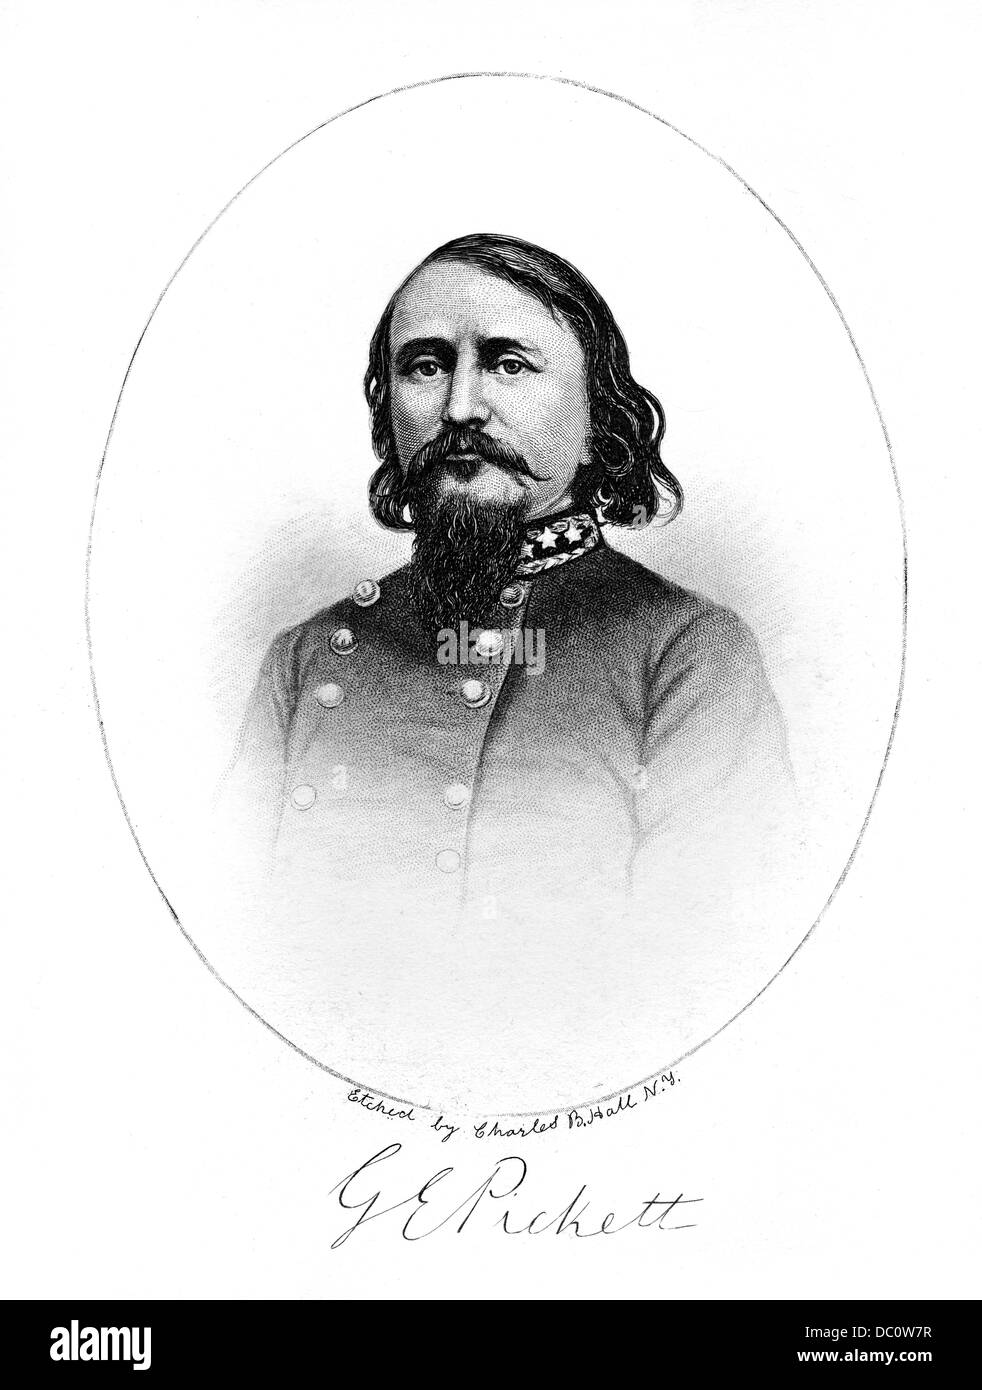 JULY 3, 1863 CSA GENERAL GEORGE PICKETT MOST REMEMBERED FOR PICKETT'S CHARGE A FUTILE ATTEMPT DURING BATTLE OF GETTYSBURG Stock Photo